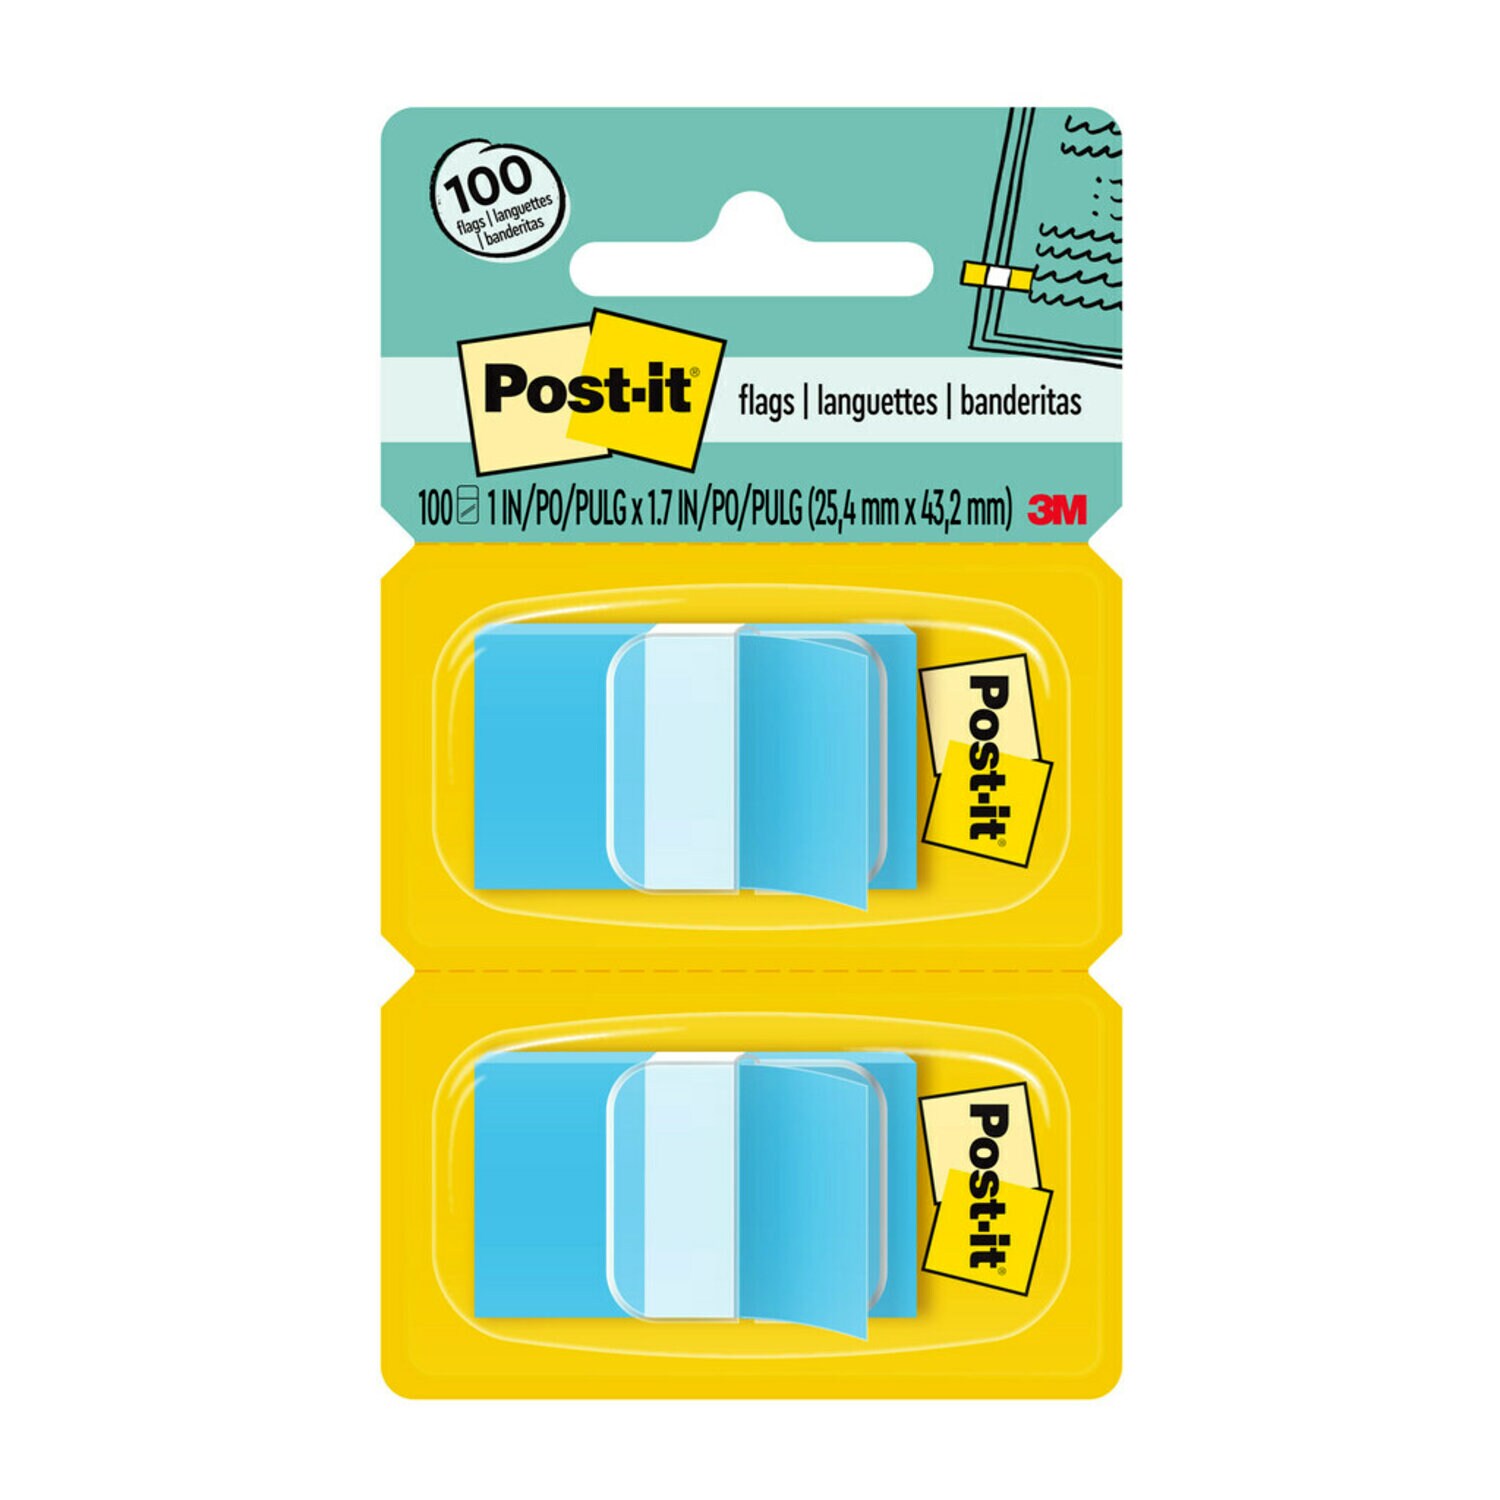 7000052453 - Post-it Flags 680-BE2, 1 in. x 1.7 in. (2.54 cm x 4.31 cm) Blue, 2-pack